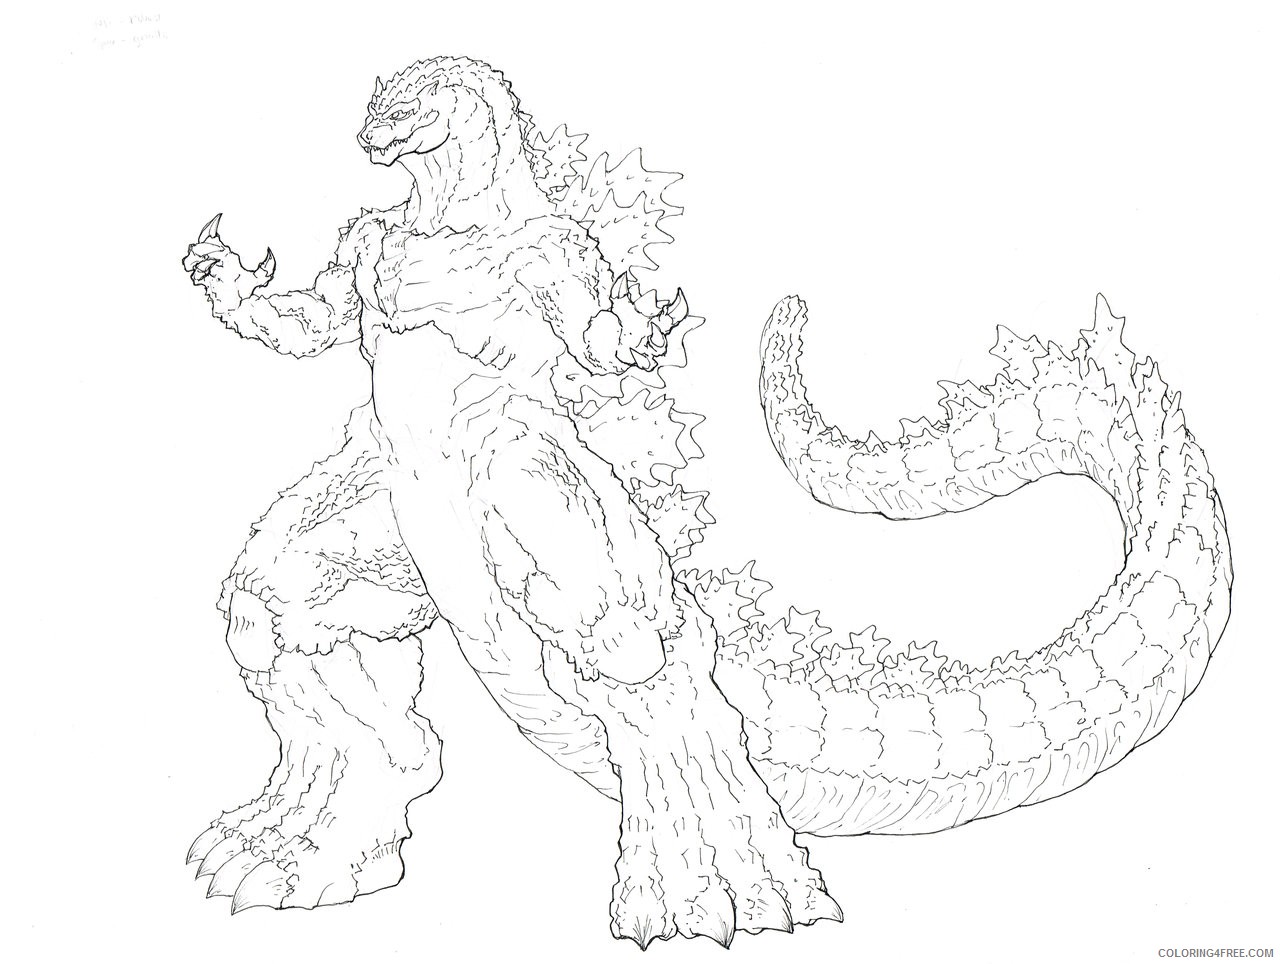 Godzilla Coloring Pages By Tgping Coloring4free Coloring4free Com